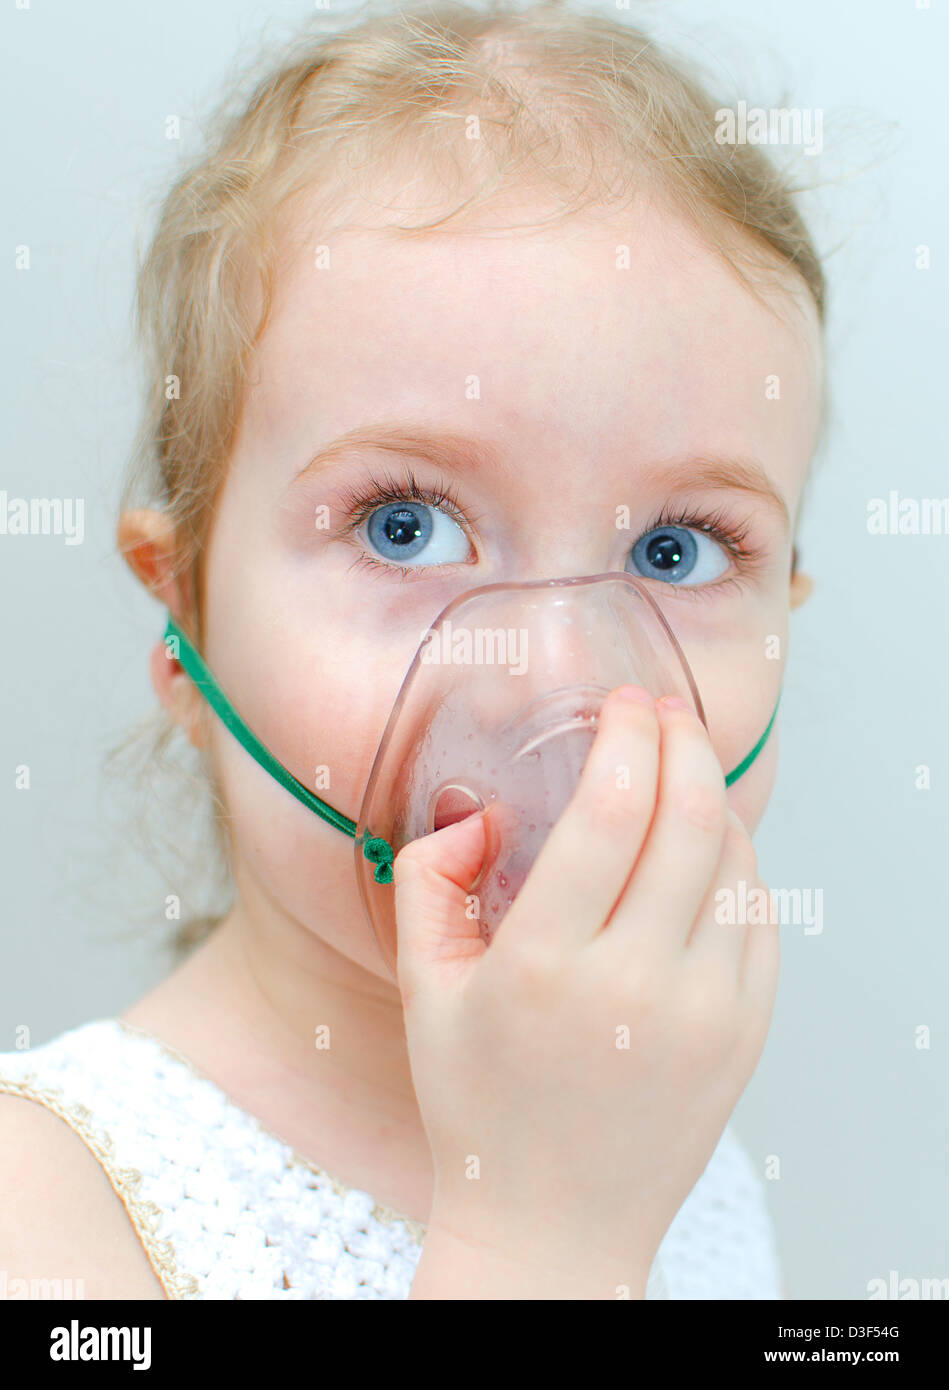 Portrait of little girl with inhalator mask face Stock Photo - Alamy